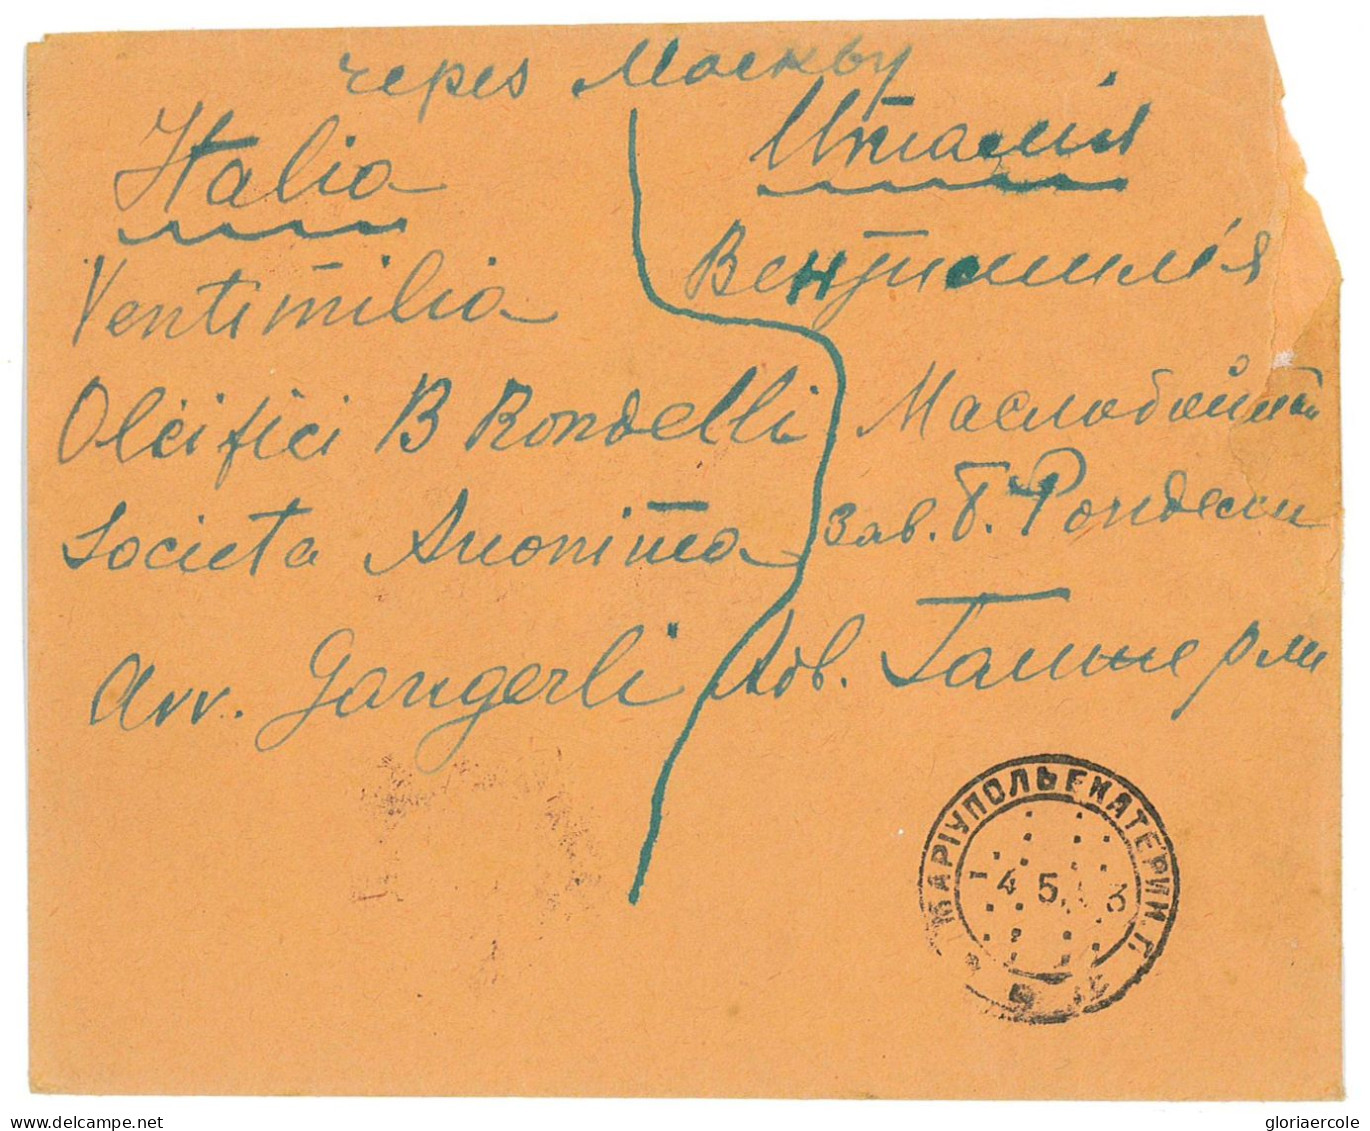 P2914 - RUSSIA , NICE FRESH COVER MIXED FRANKING. 650 RUBEL RATE TO ITALY - Storia Postale